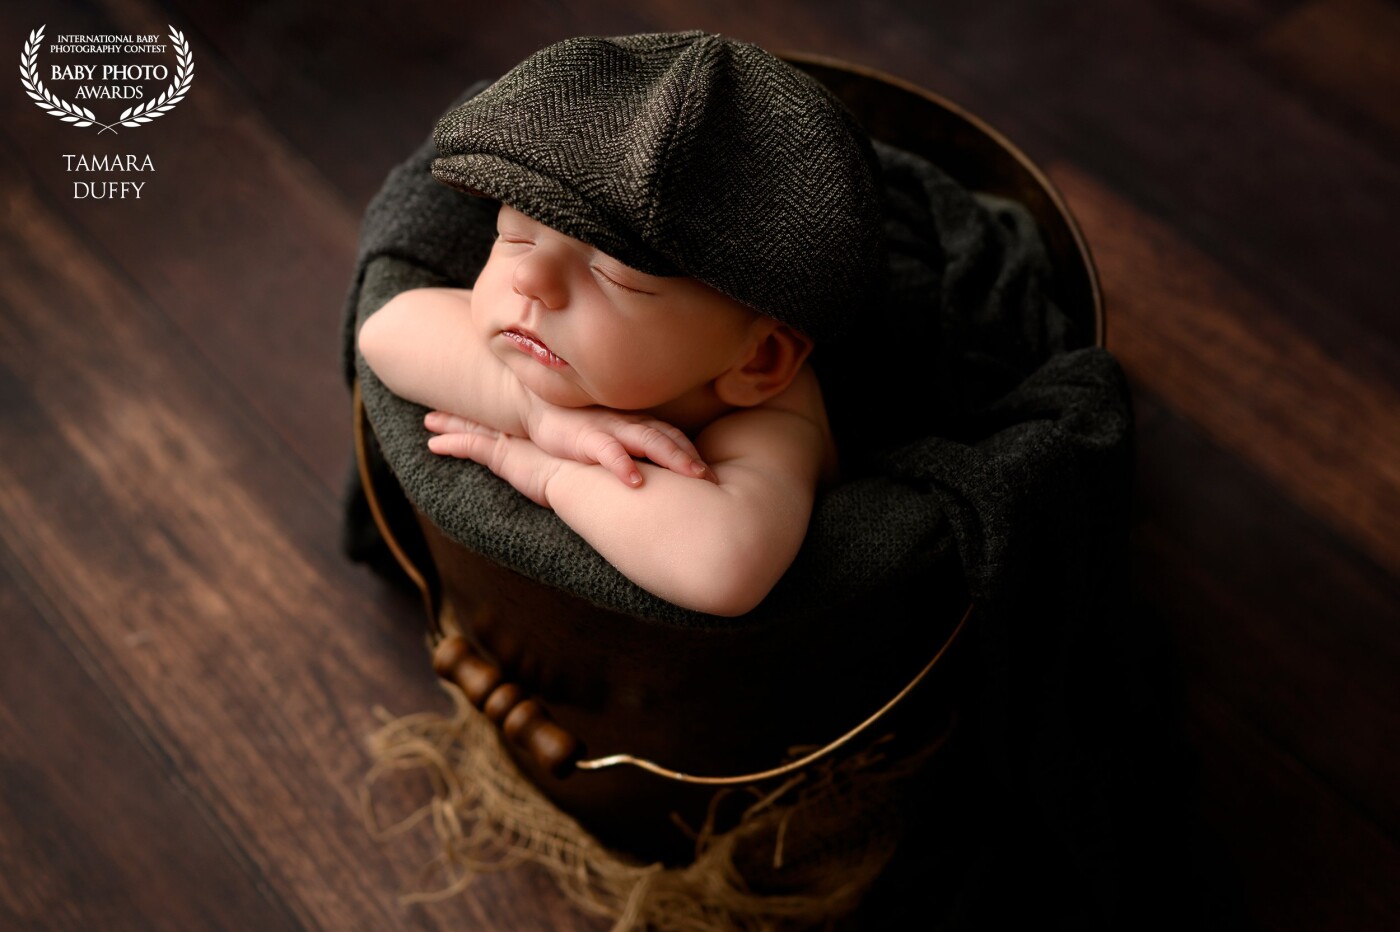 Such a sweet little peanut and his hat is the perfect addition to make his portrait look magical!